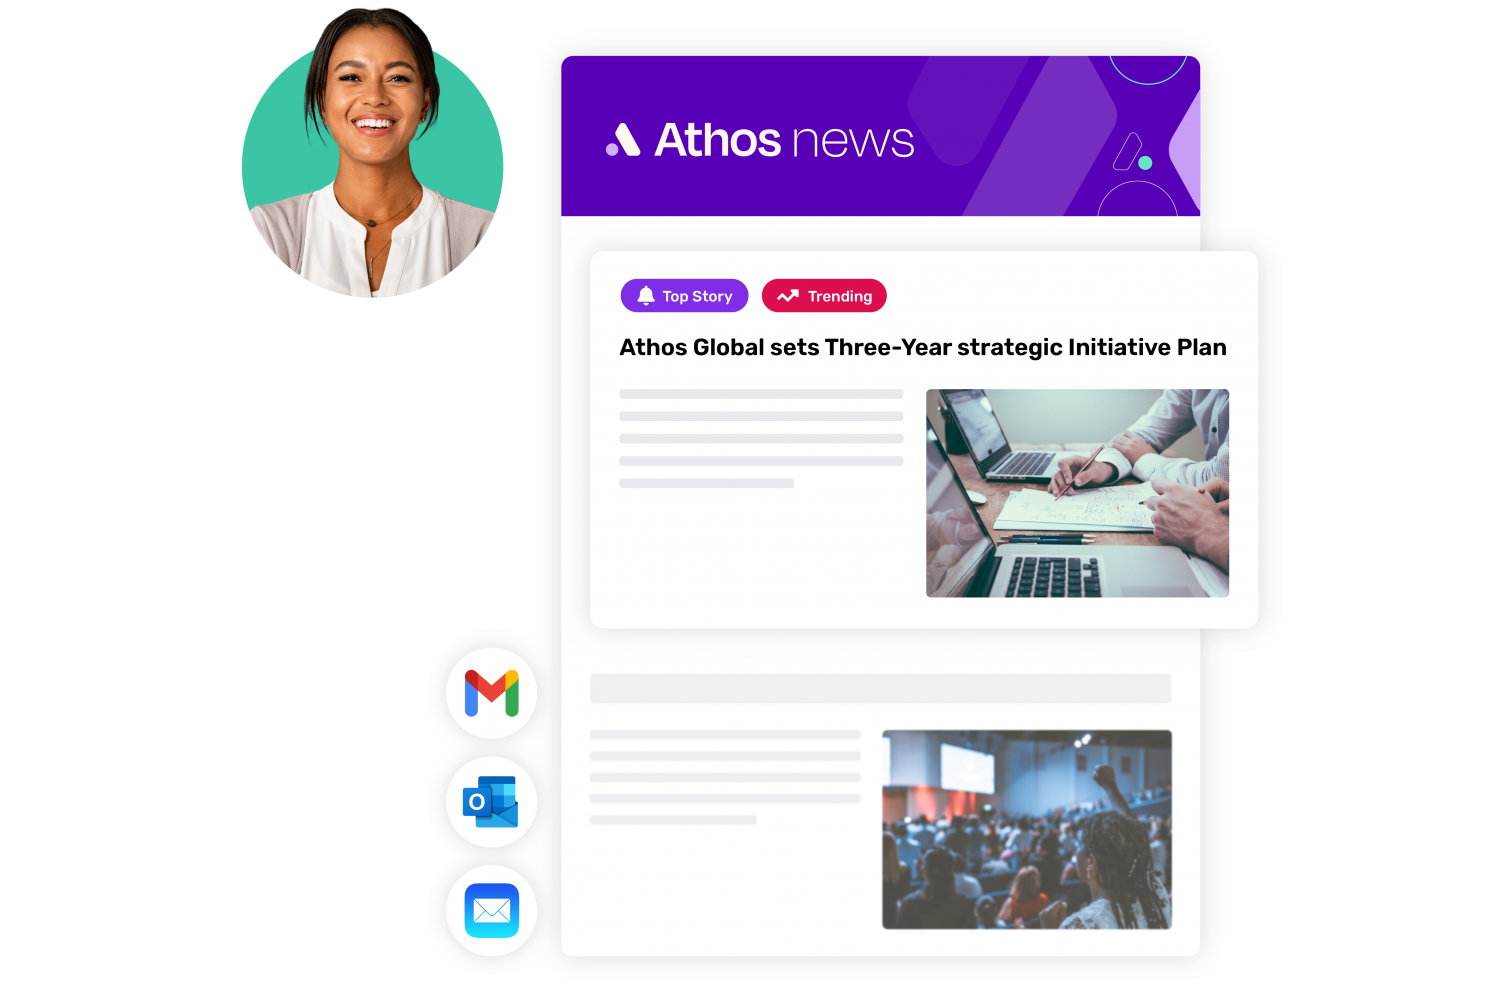 Athos corporate newsletter with highlighted story that reads "Athos Global sets Three-Year strategic Initiative Plan" with Gmail, Outlook, and Apple email logos